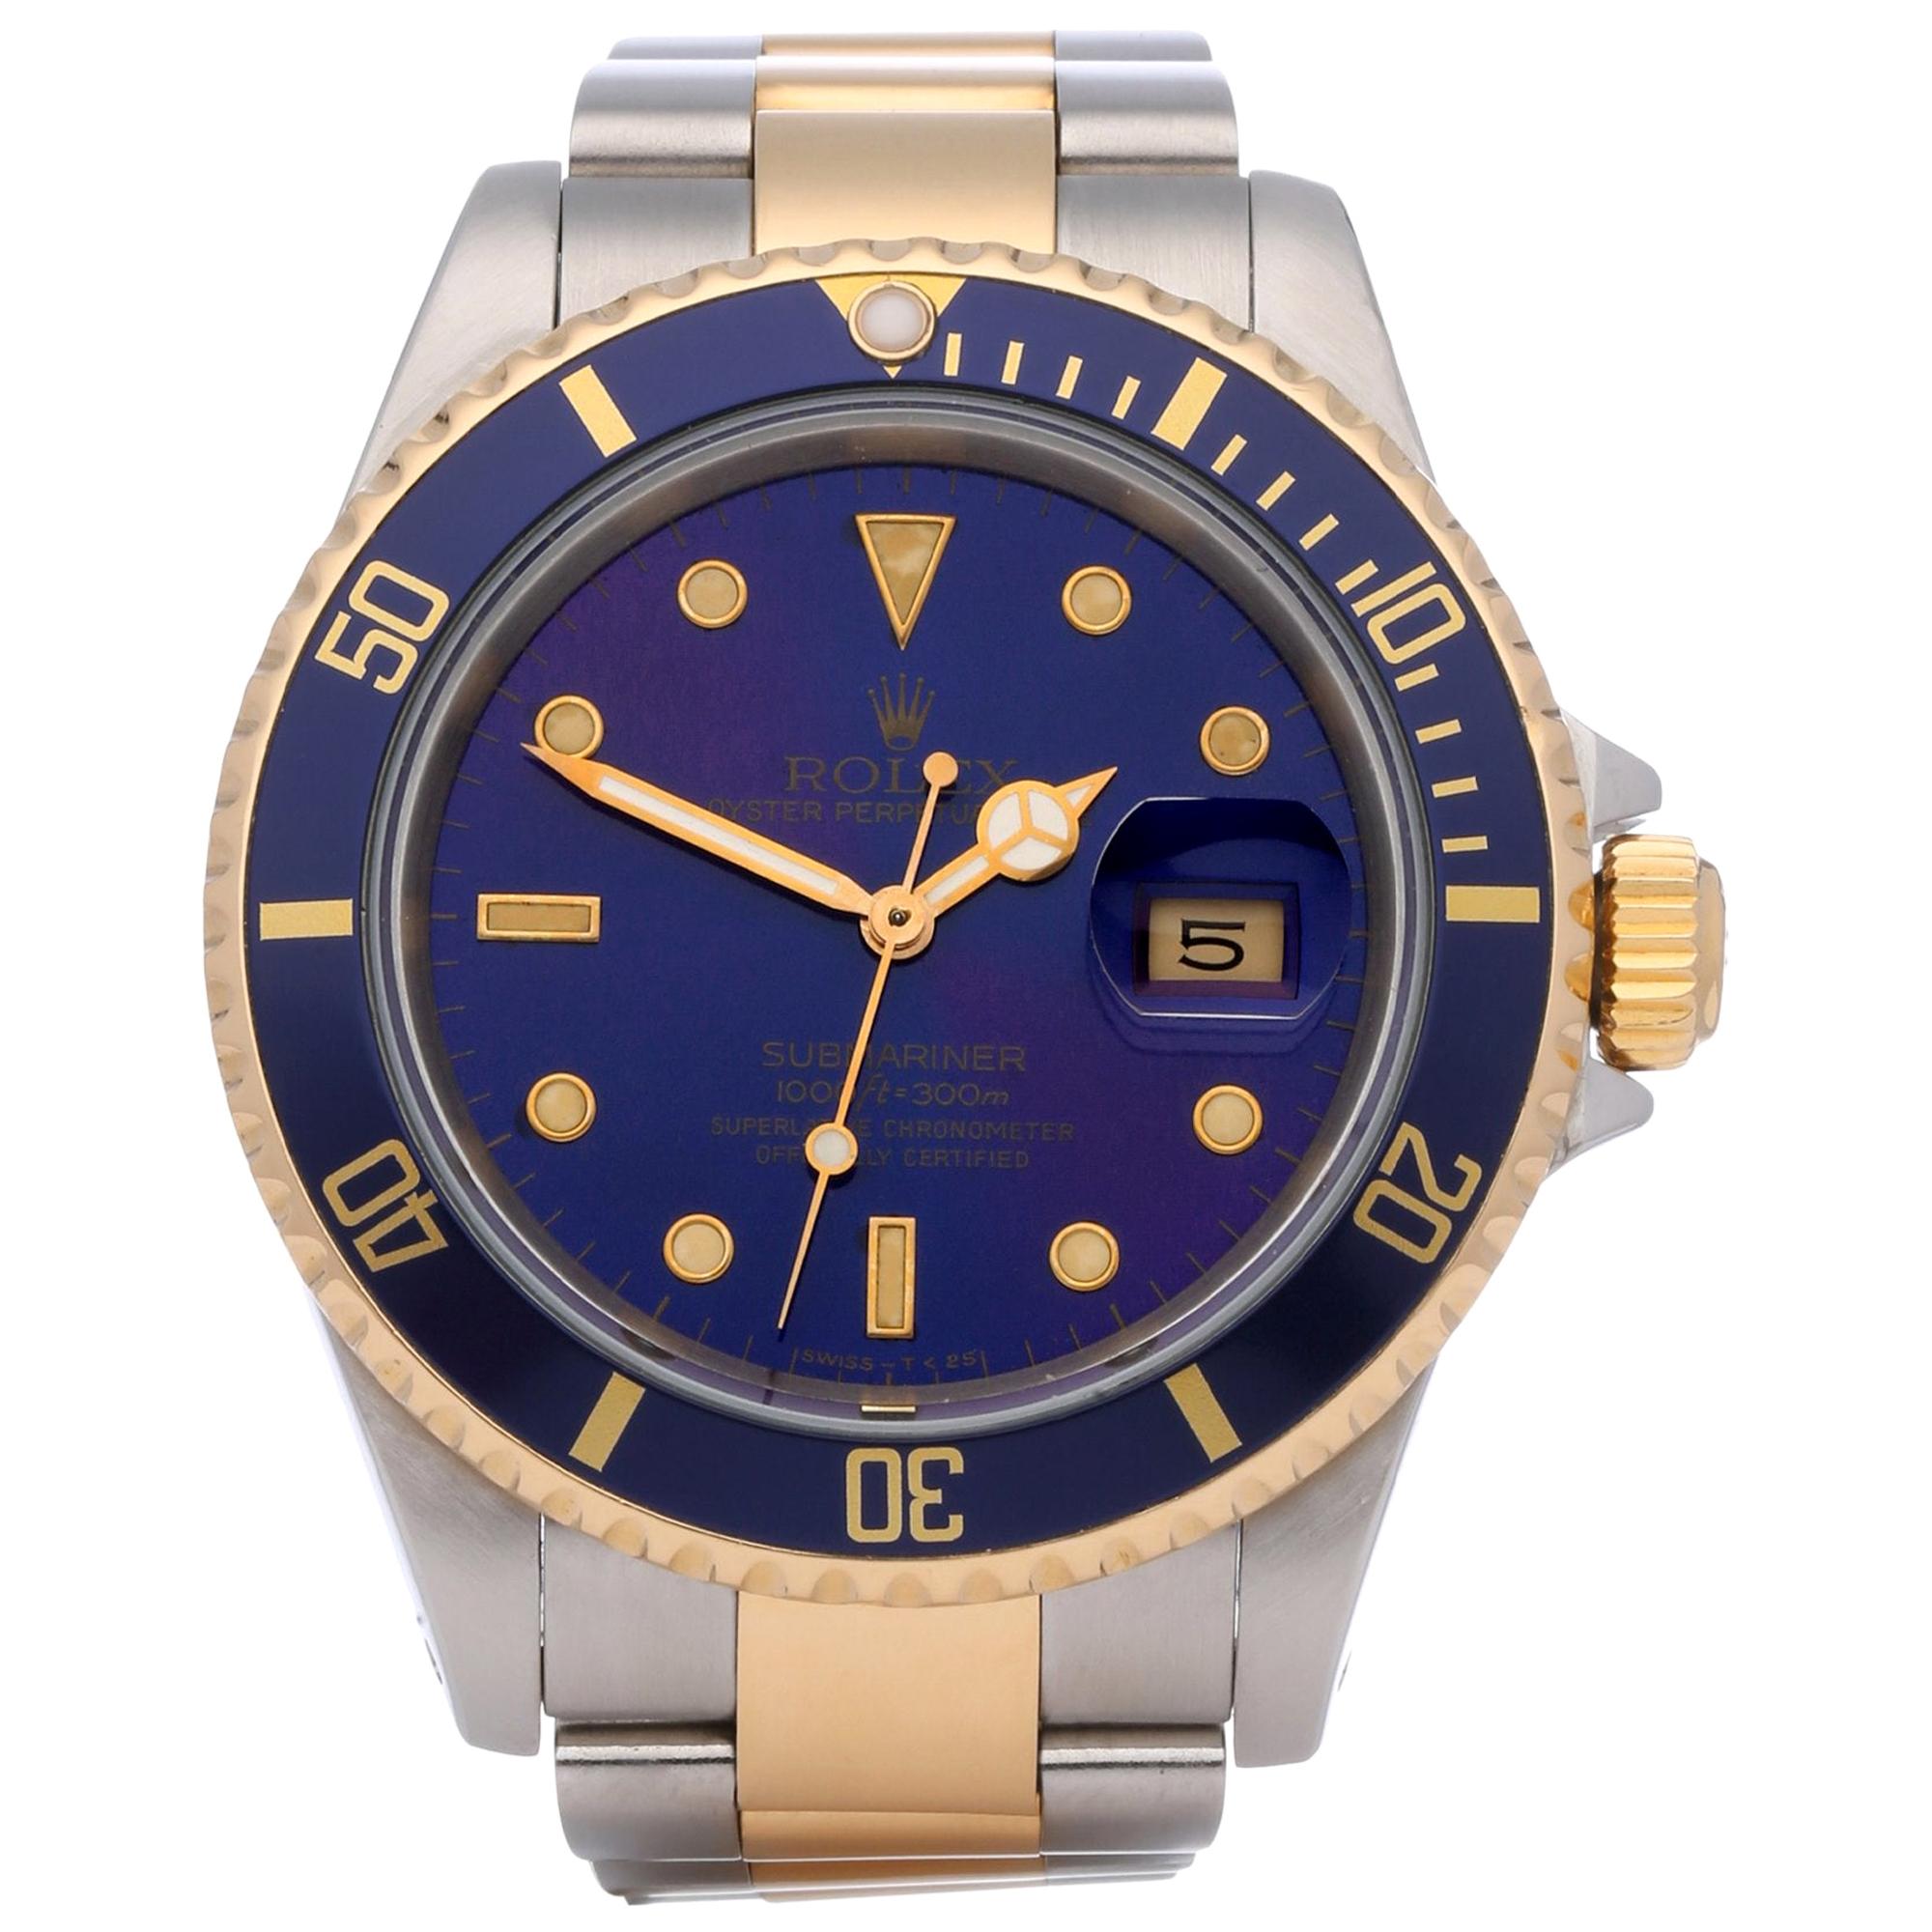 Rolex Submariner Date 16613 Men’s Stainless Steel and Yellow Gold Purple Watch